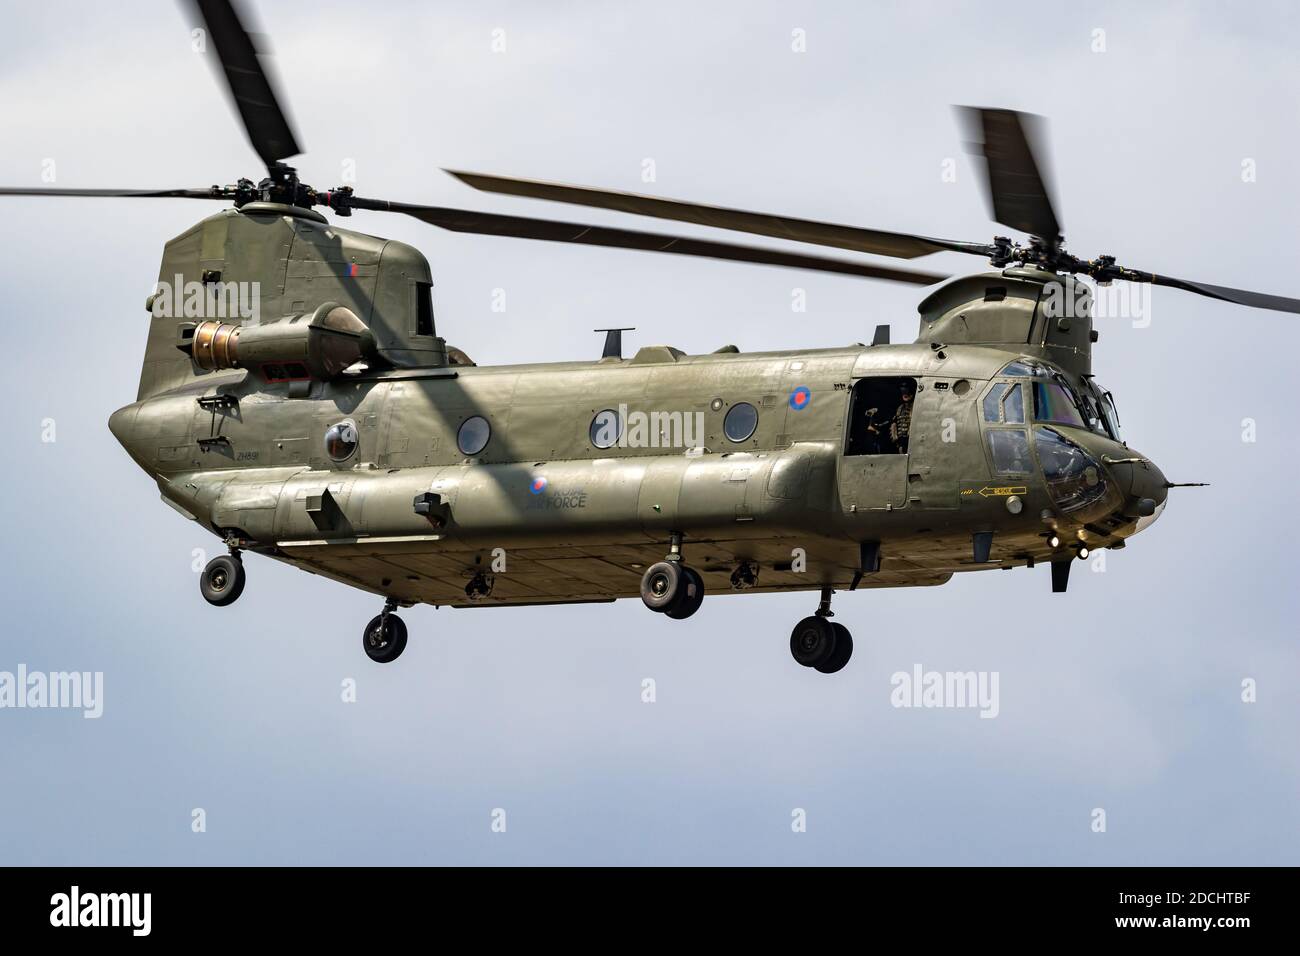 Royal Air Force CH-47 Chinook cargo helicopter in flight over RAF Fairford airbase. UK - July 13, 2018 Stock Photo